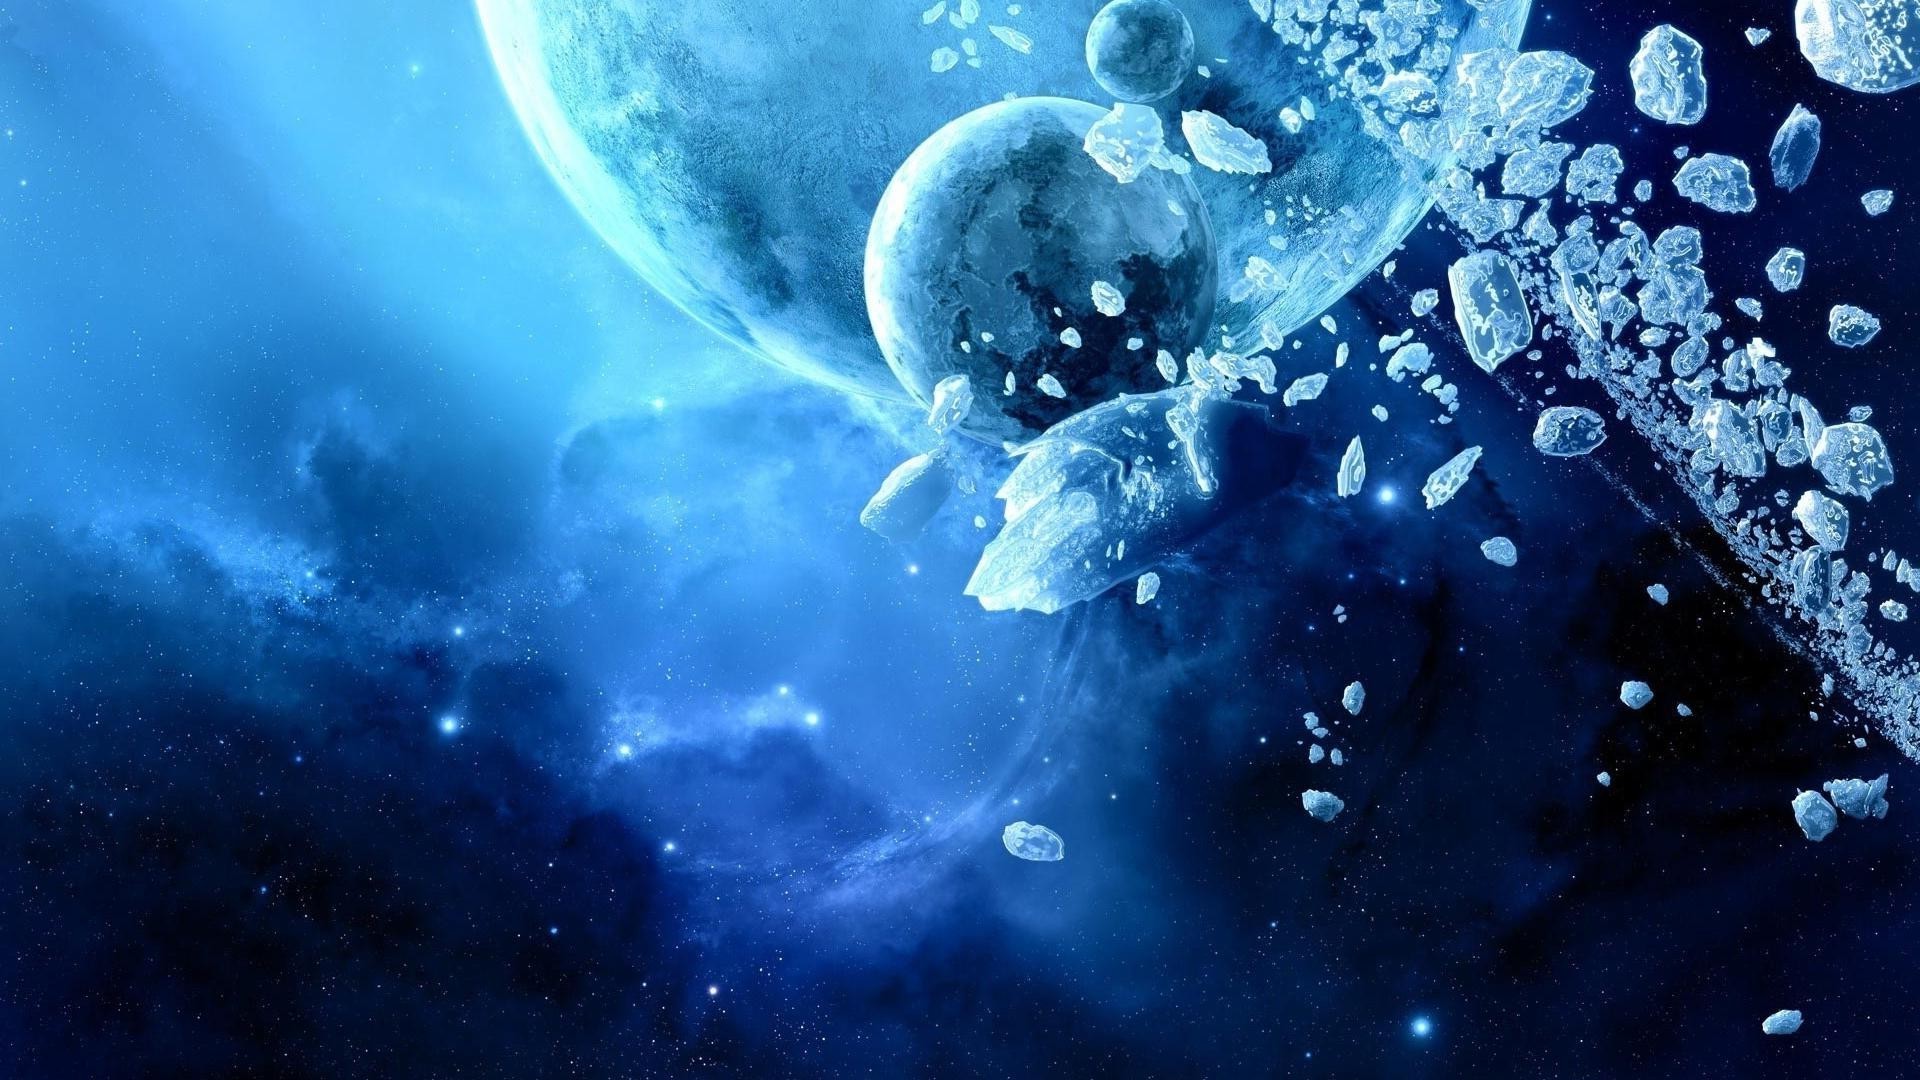 planets underwater bubble water nature desktop moon science turquoise wet space cold abstract light